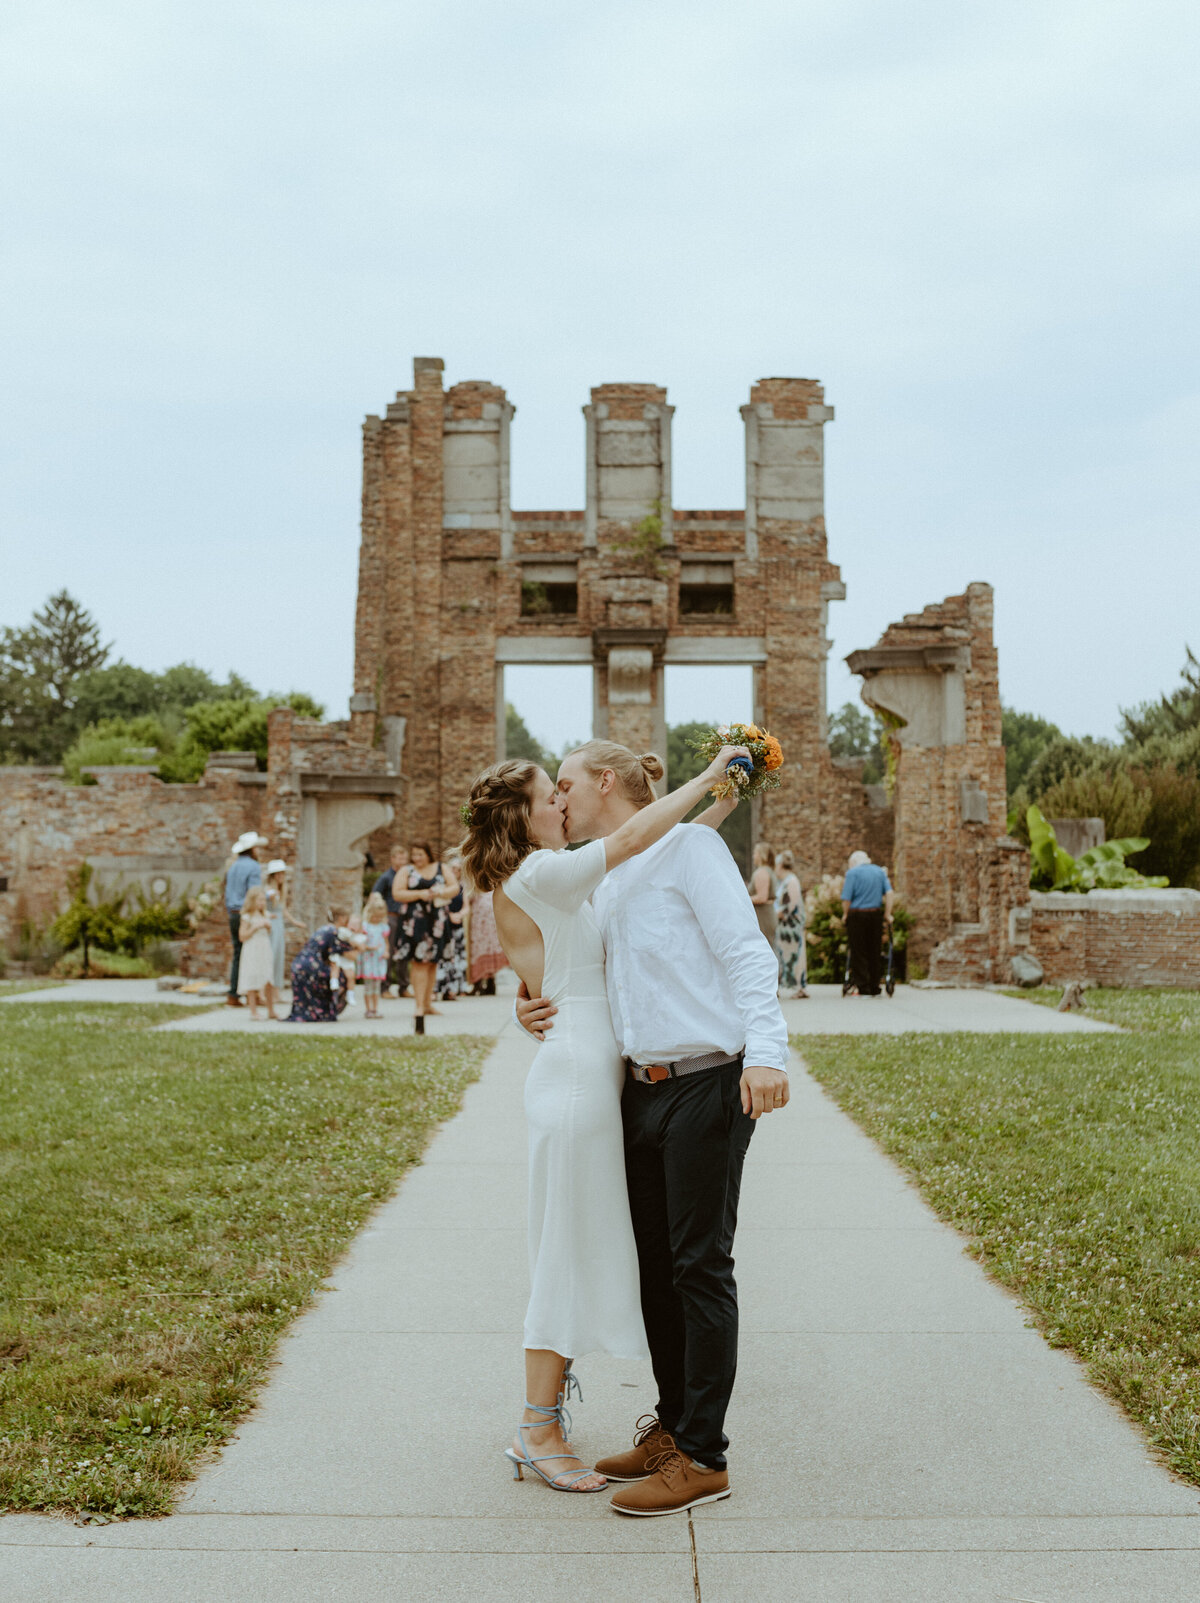 JustJessPhotography_Indianapolis Photographer_Brittany&Hank Holliday Park elopement371